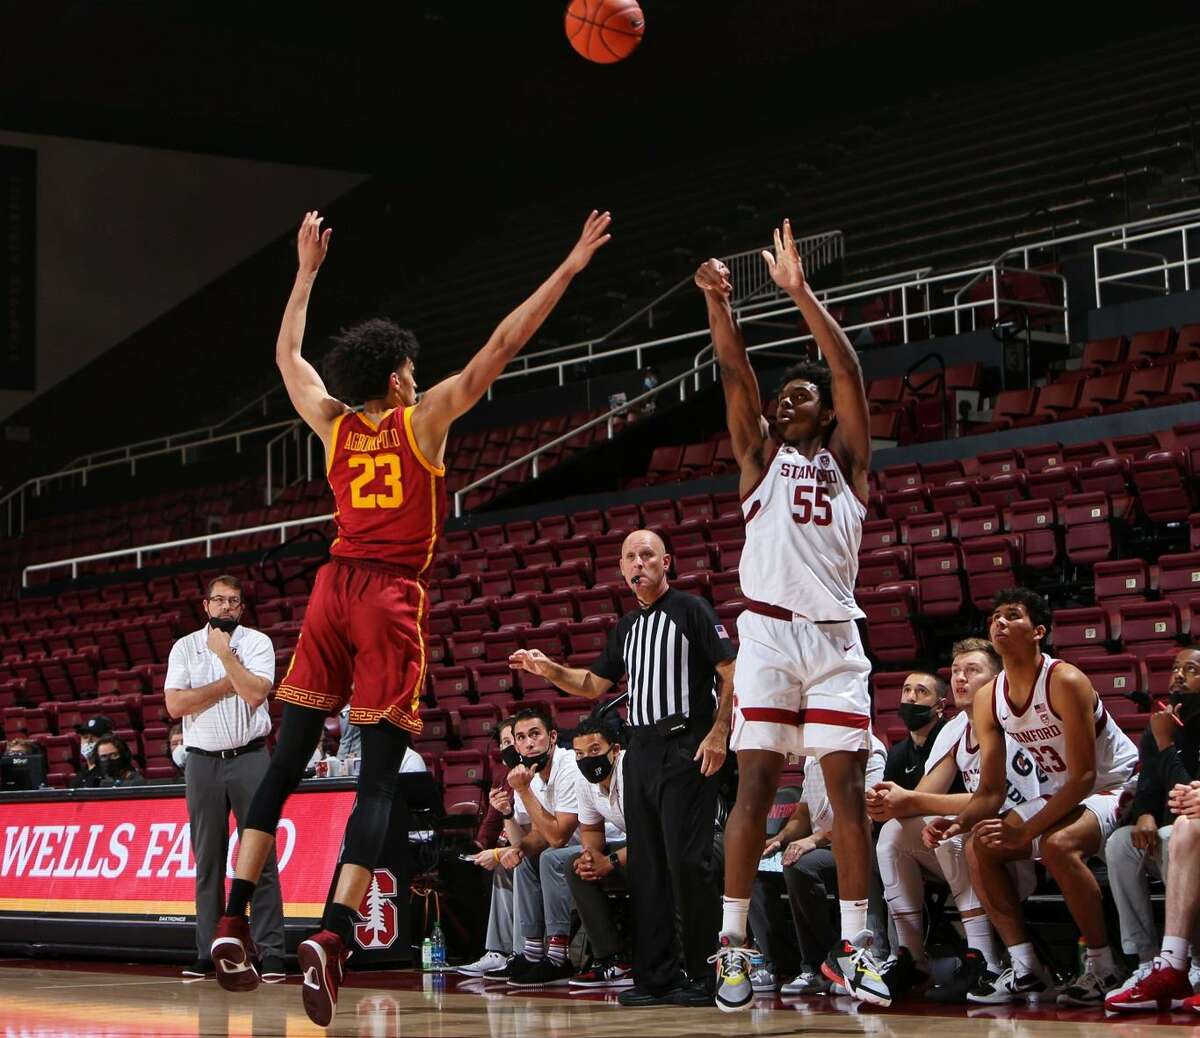 Harrison Ingram scored 21 points in Stanford's victory over No. 5 USC on Tuesday.